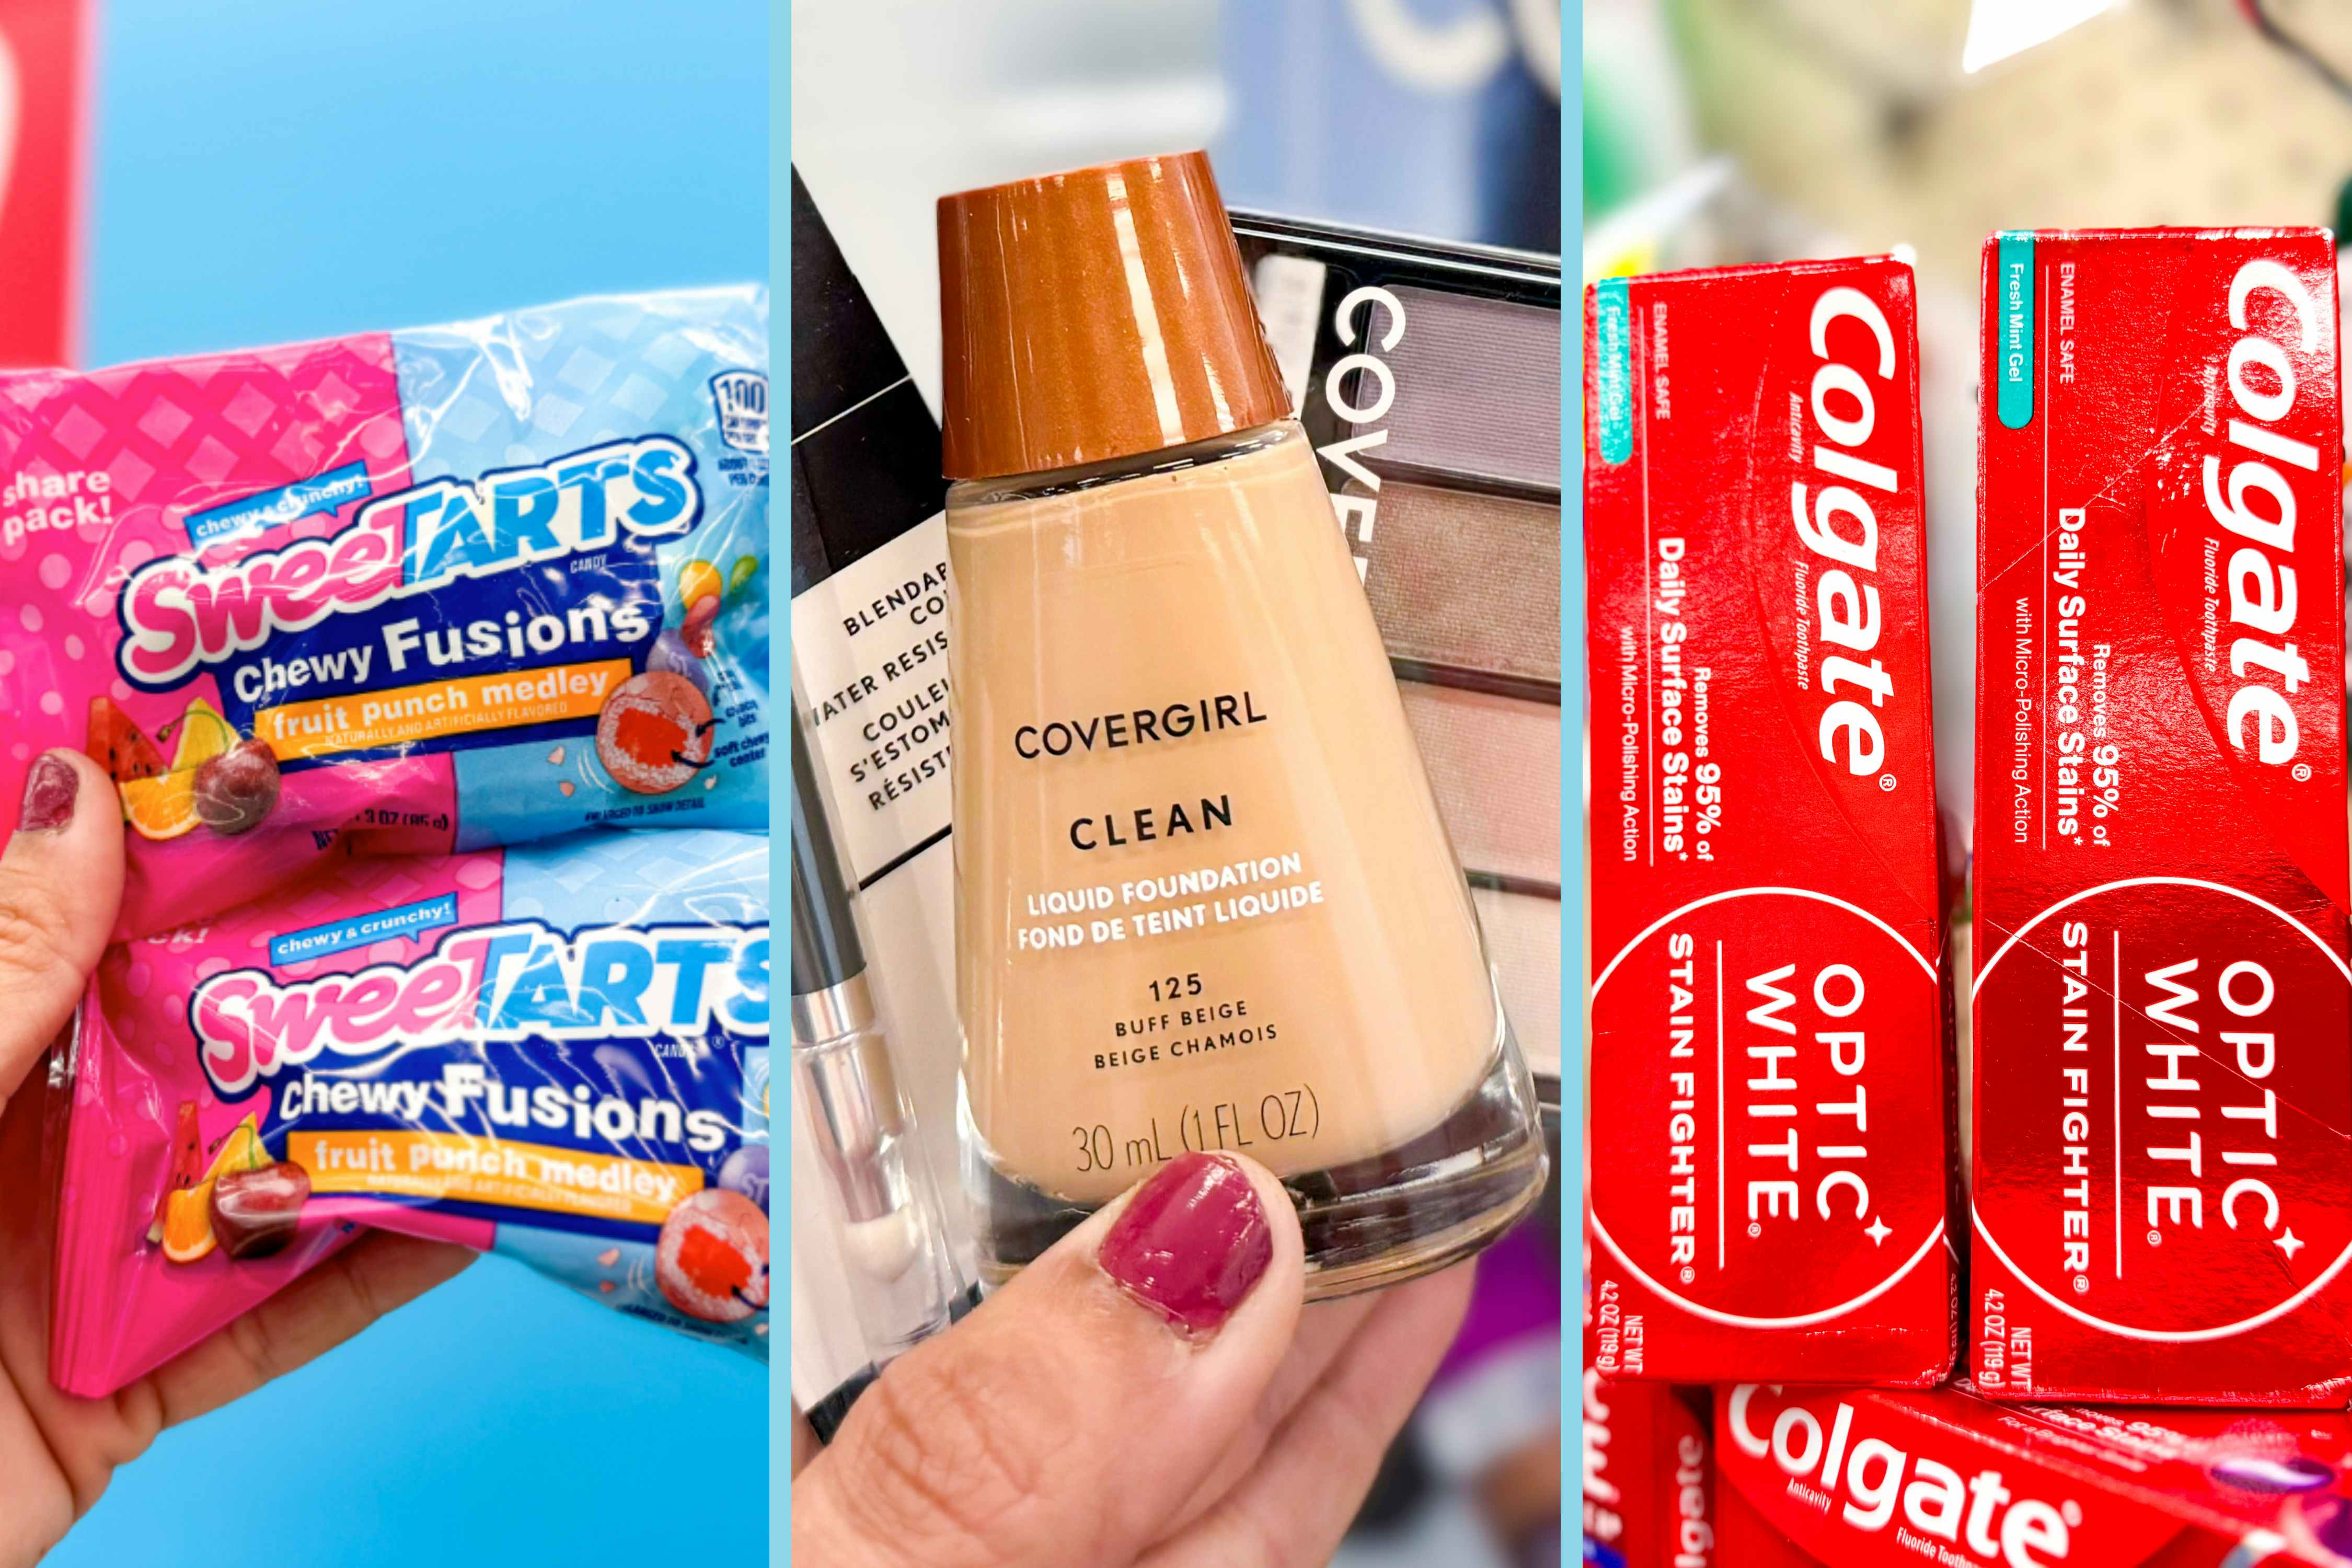 Hottest Coupon Deals This Week: Free Covergirl, Colgate, Candy, and More